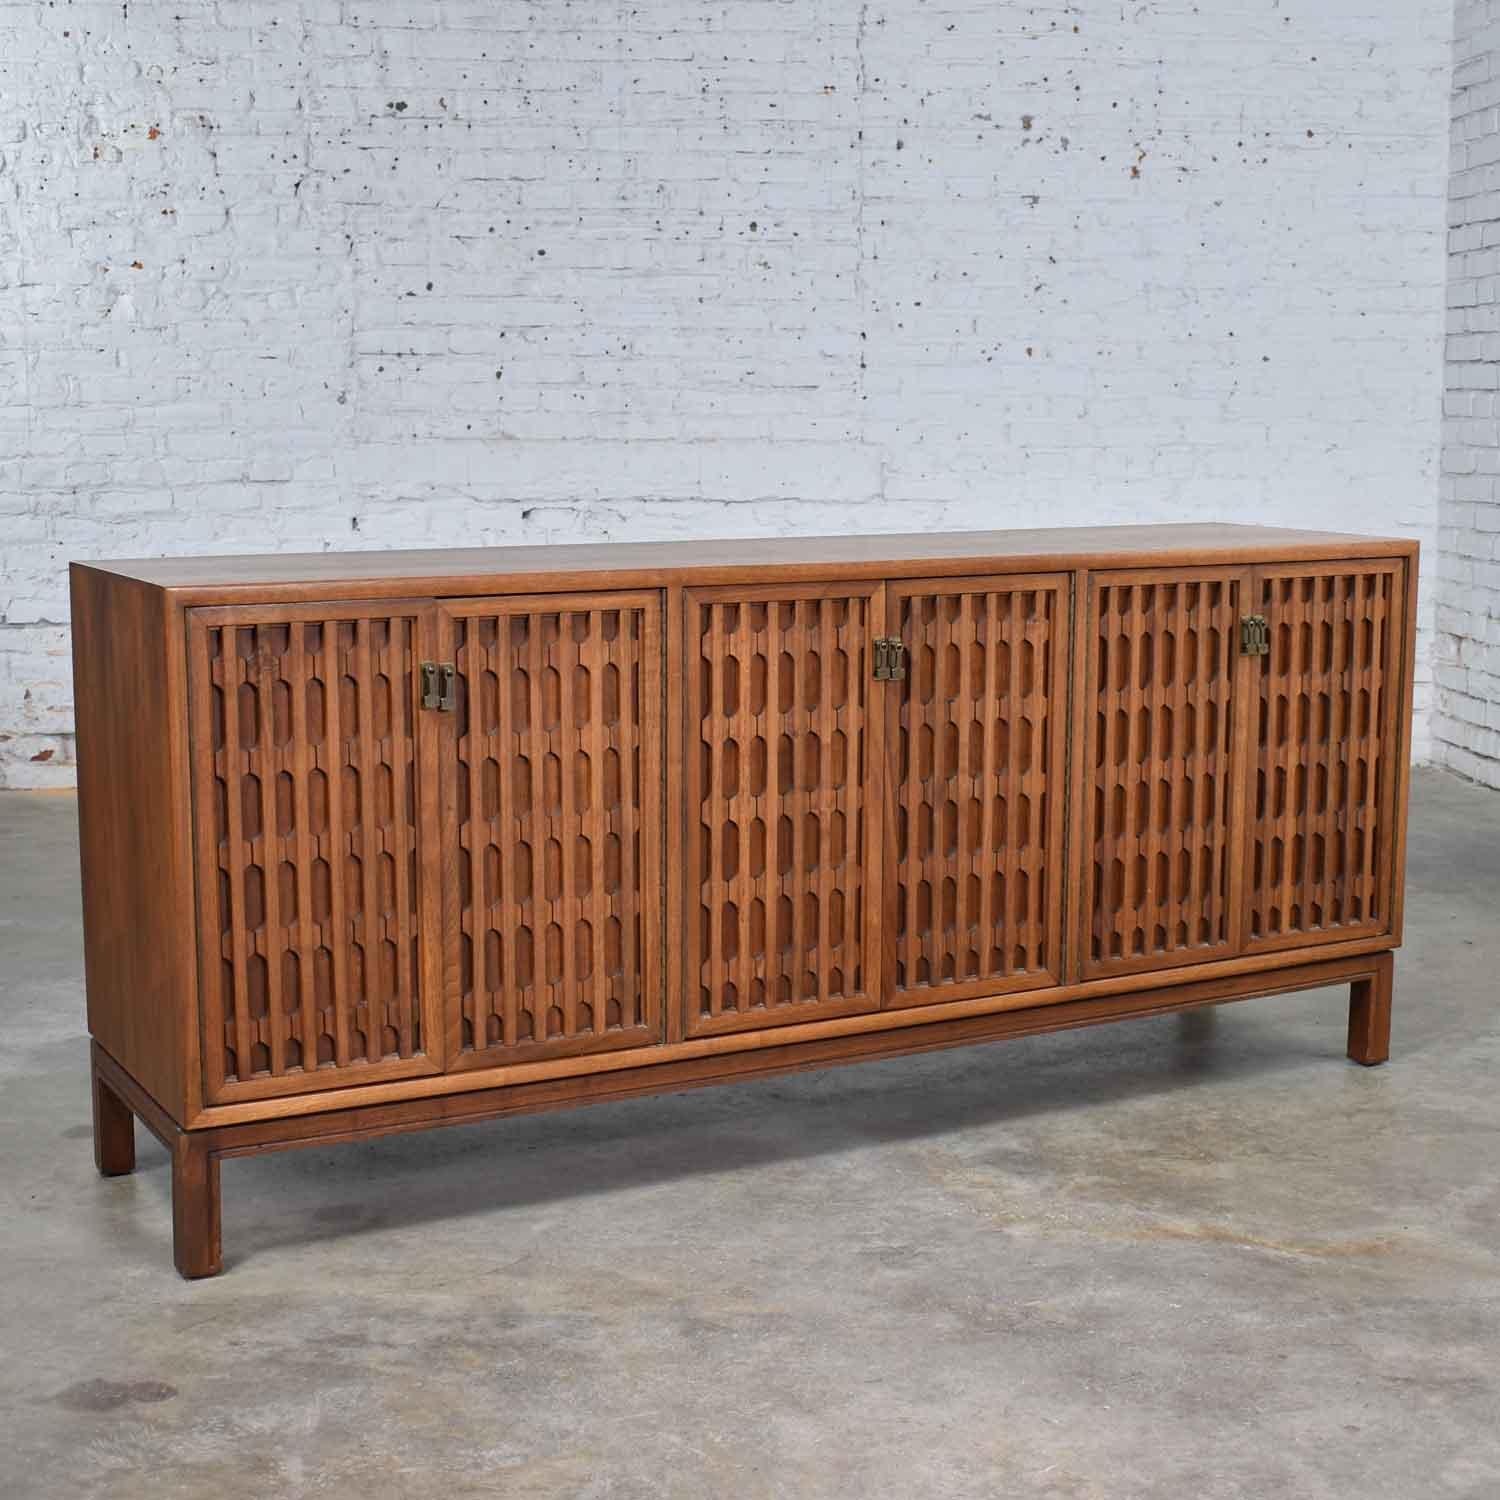 Handsome Mid-Century Modern walnut credenza unmarked but done in the style of John Stuart Widdicomb. It is in fabulous vintage condition. The top finish has been restored to remove some fading that had occurred. The rest of the piece retains its